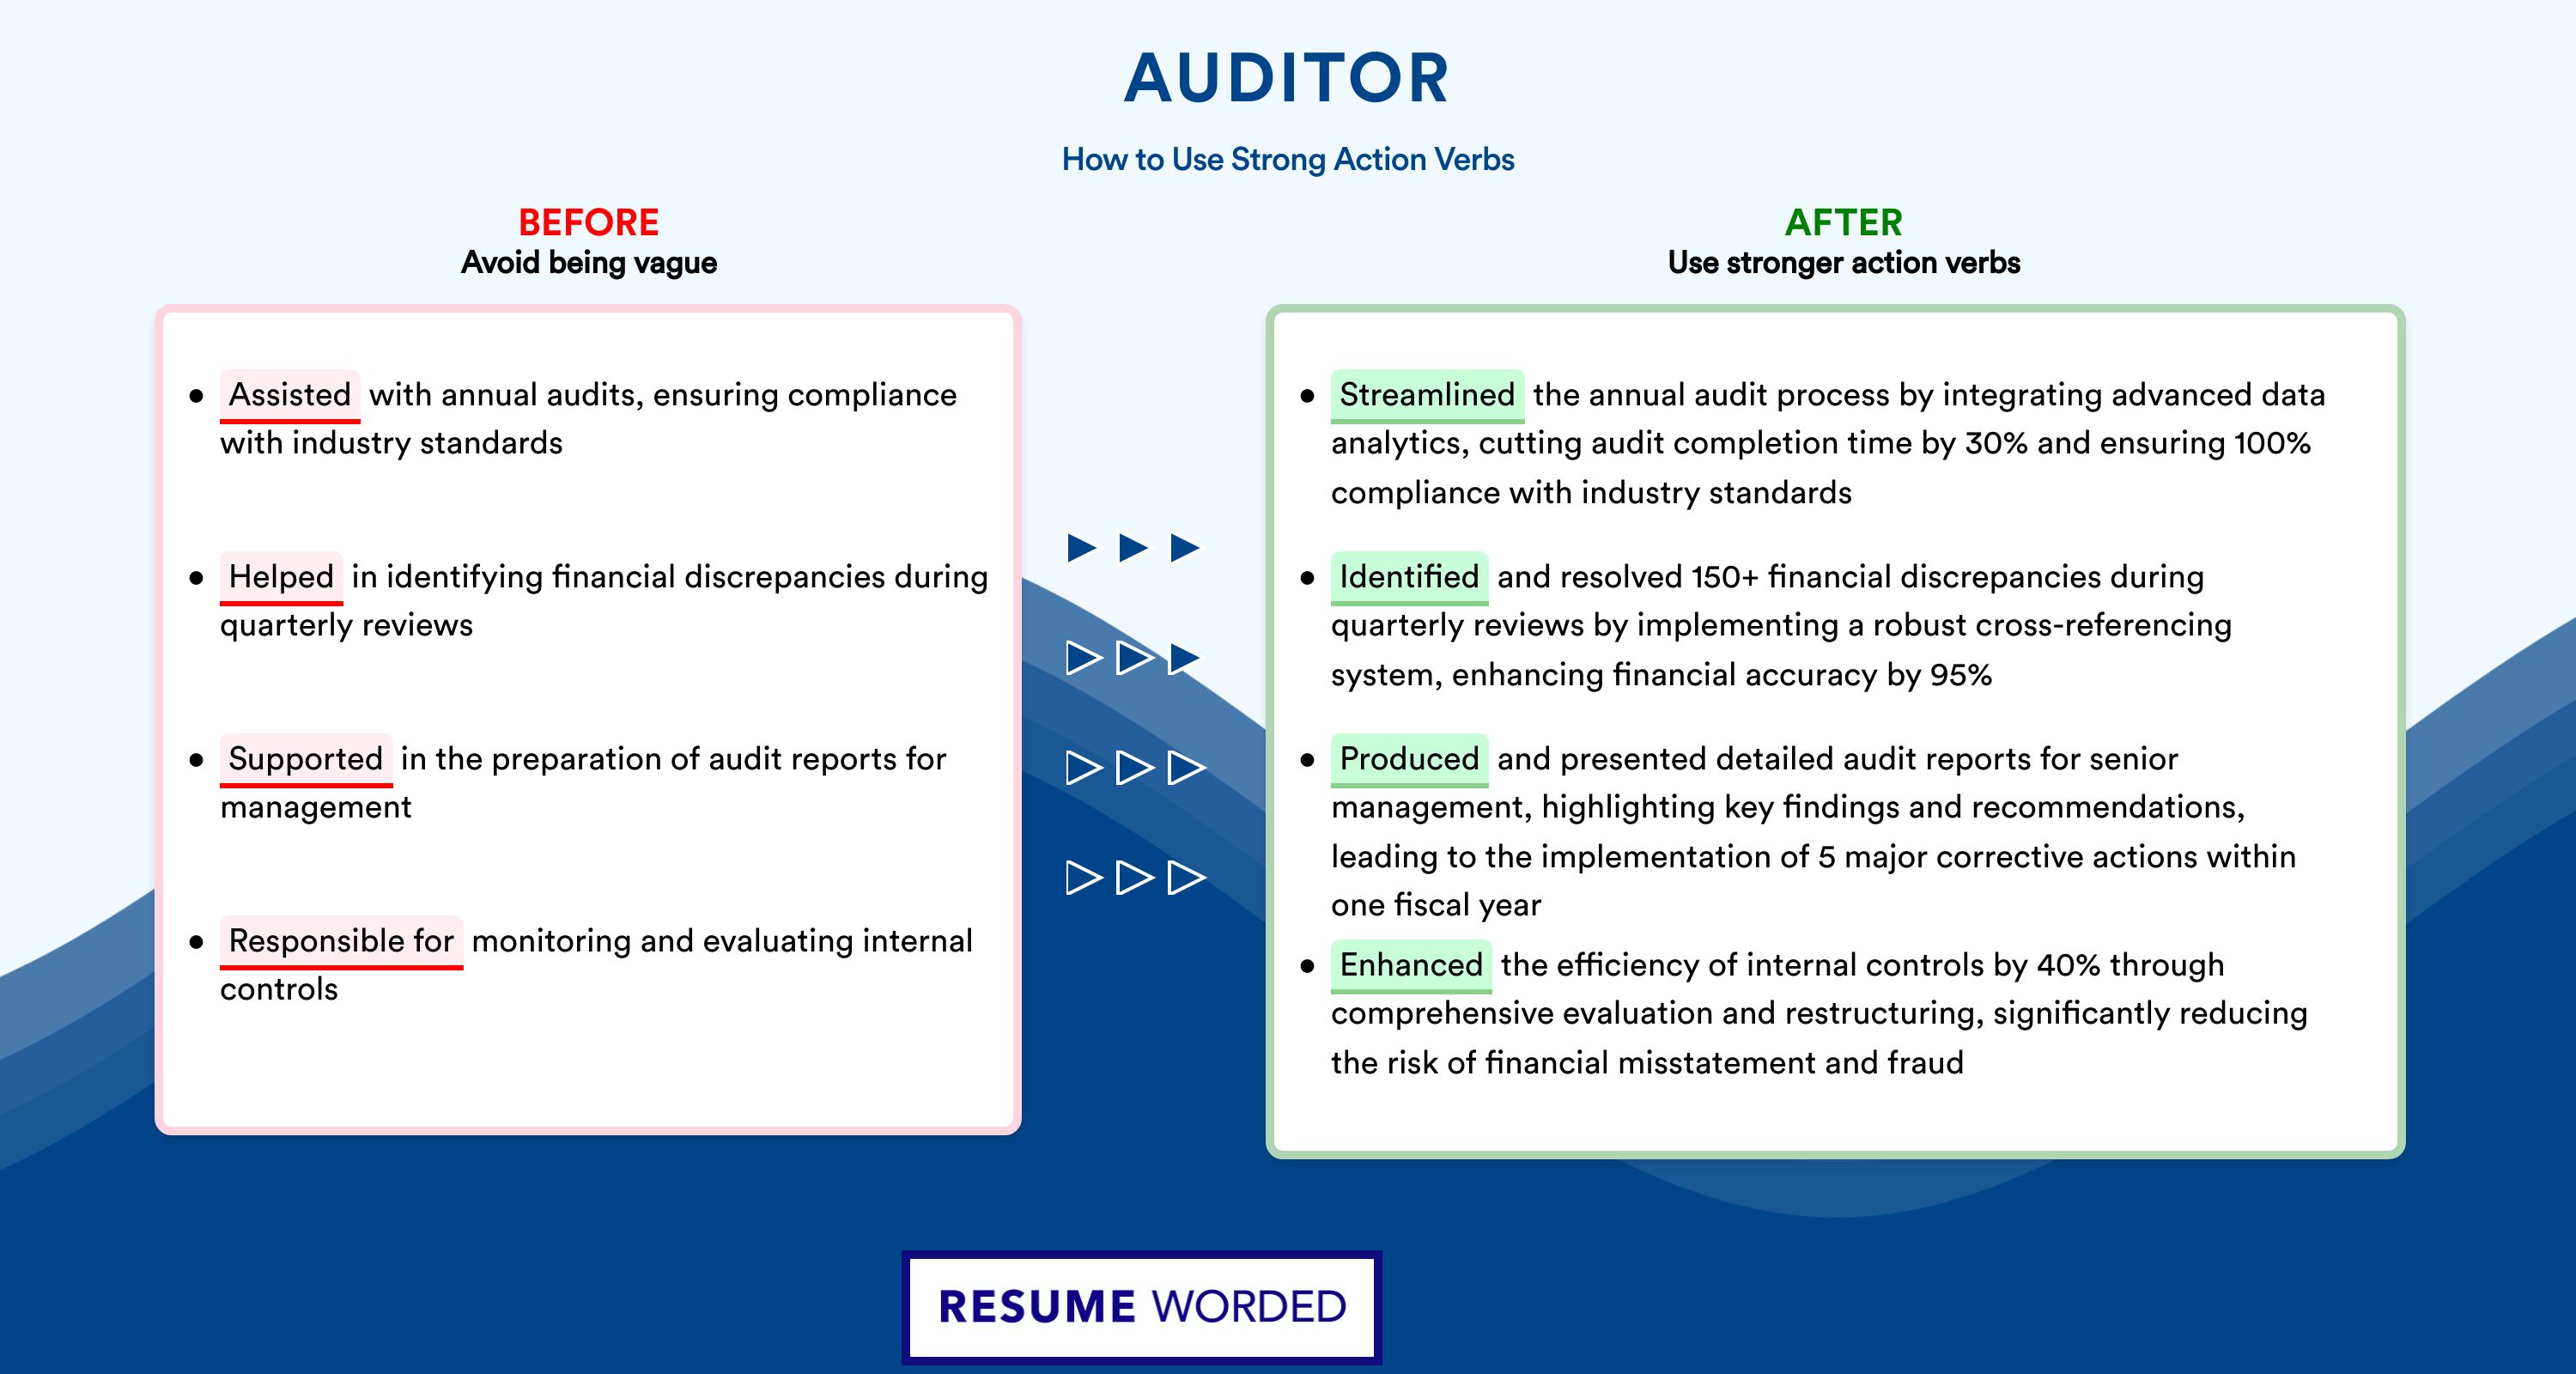 Action Verbs for Auditor